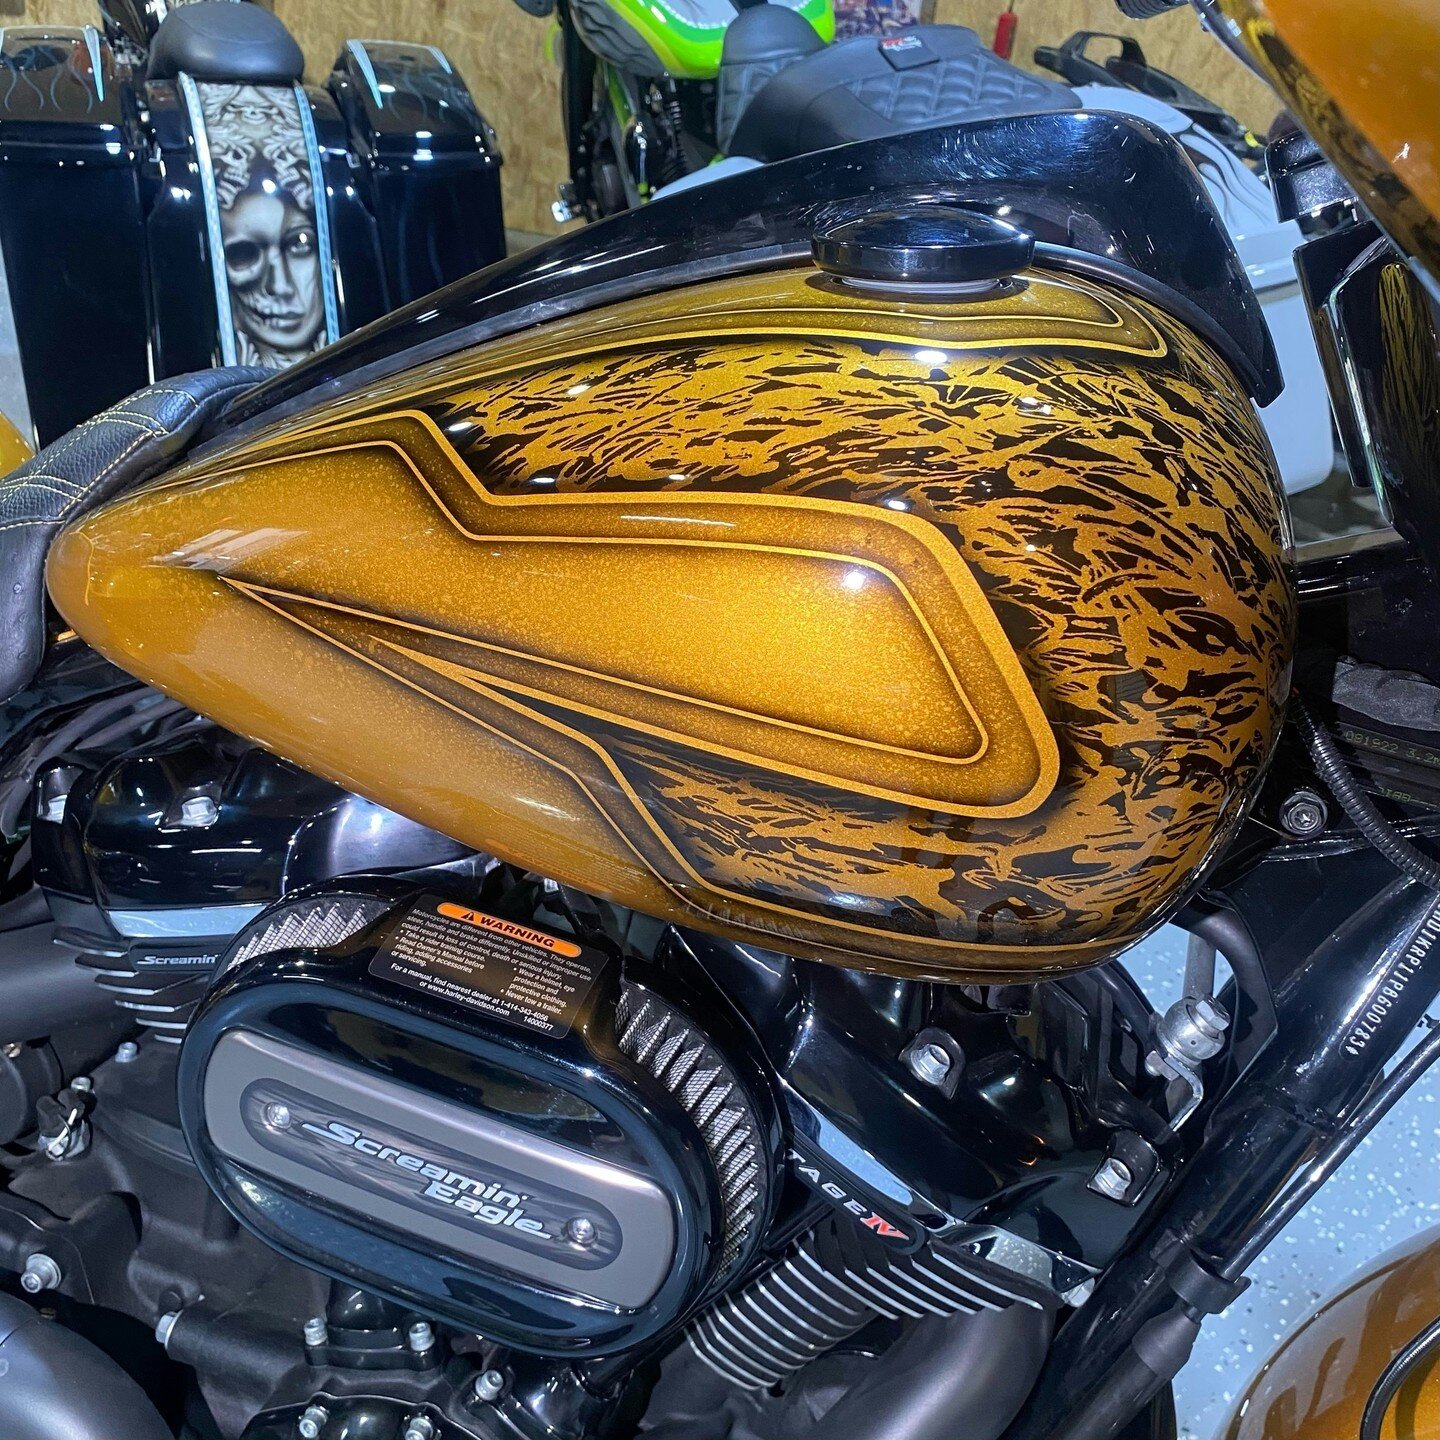 Our client rolled in with a badass streetglide, and we hooked it up with some sick custom graphics to take its style to the next level.